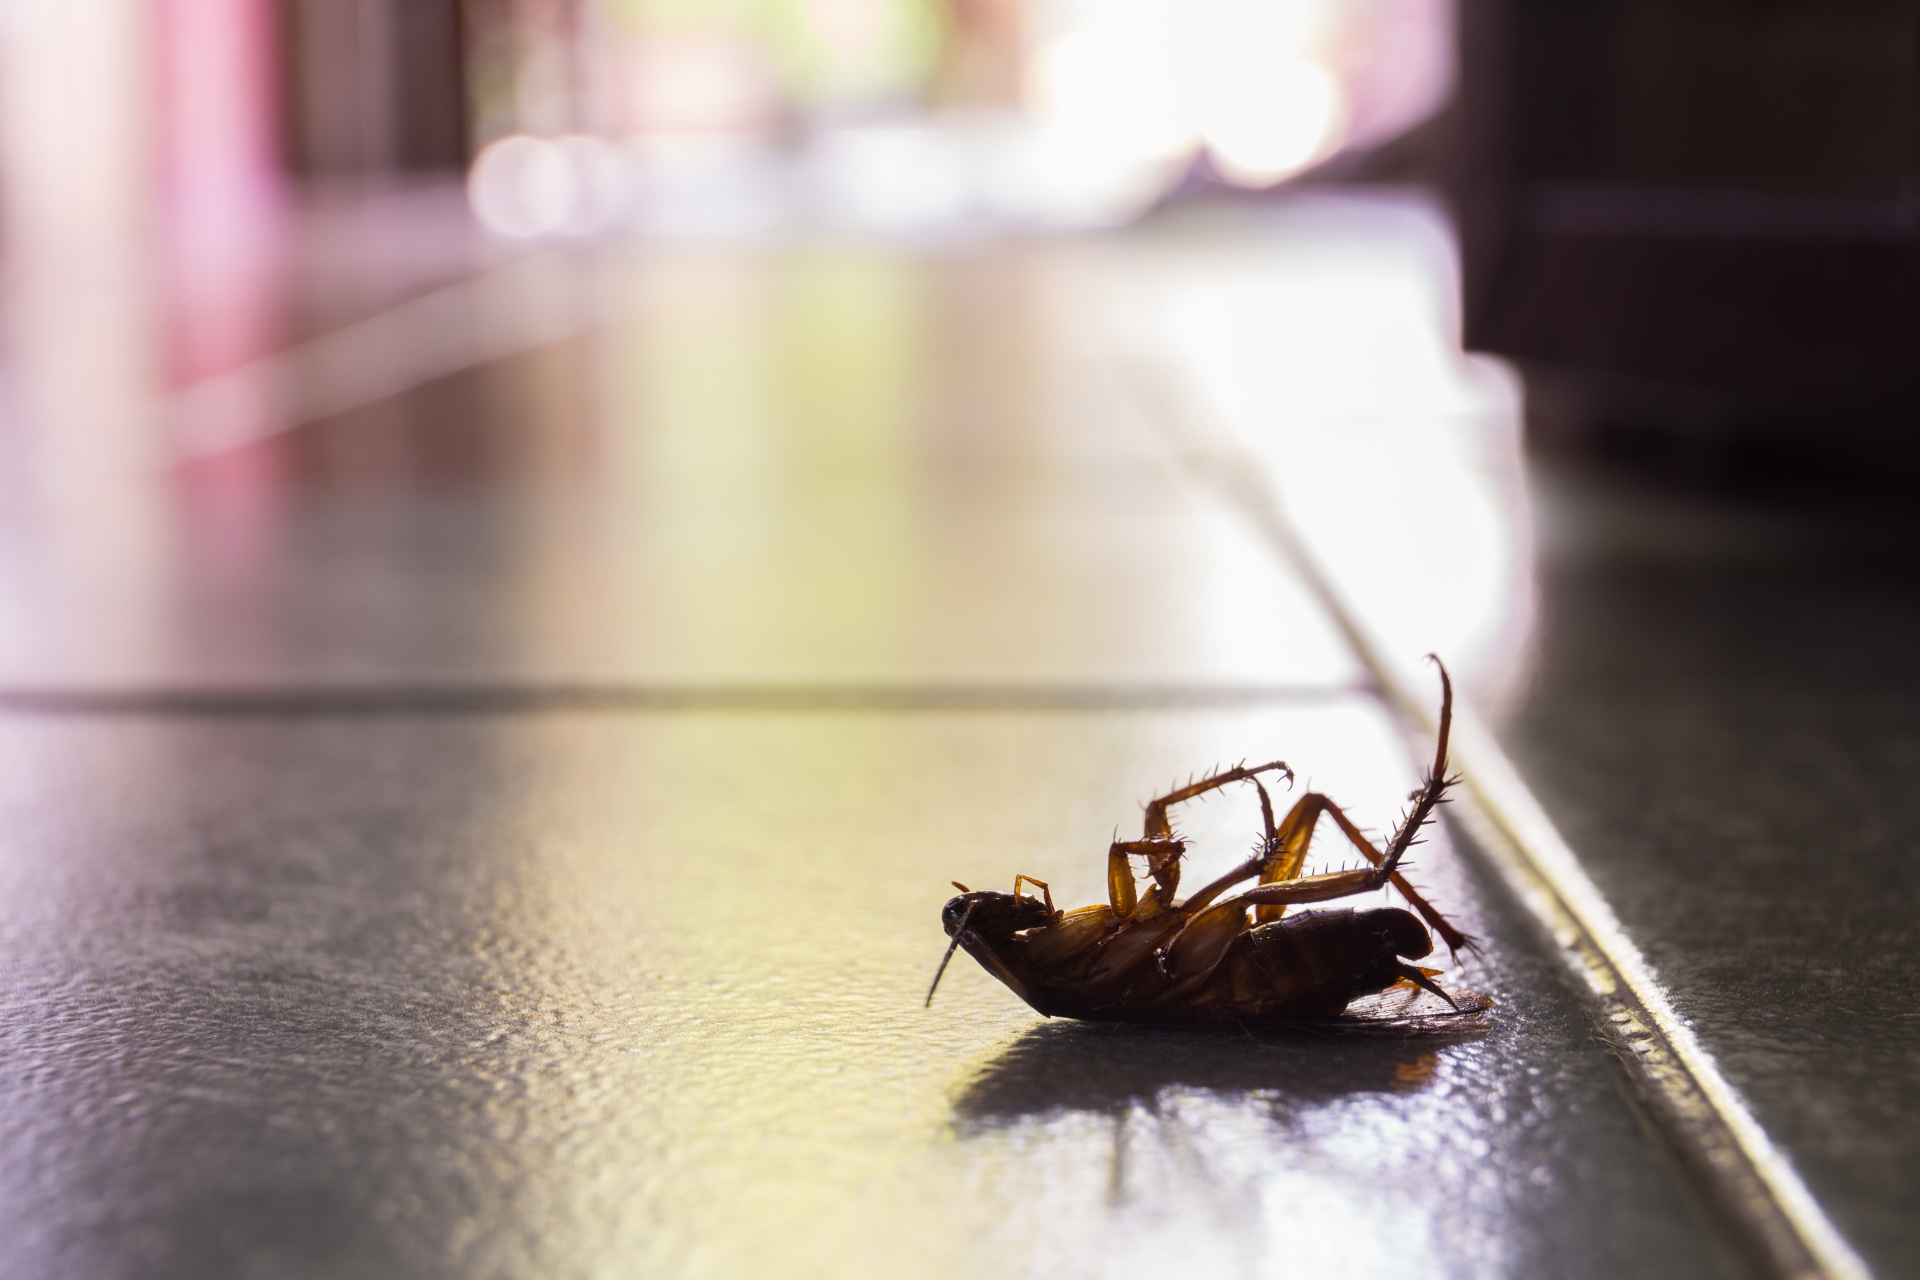 Cockroach Control, Pest Control in East Finchley, N2. Call Now 020 8166 9746